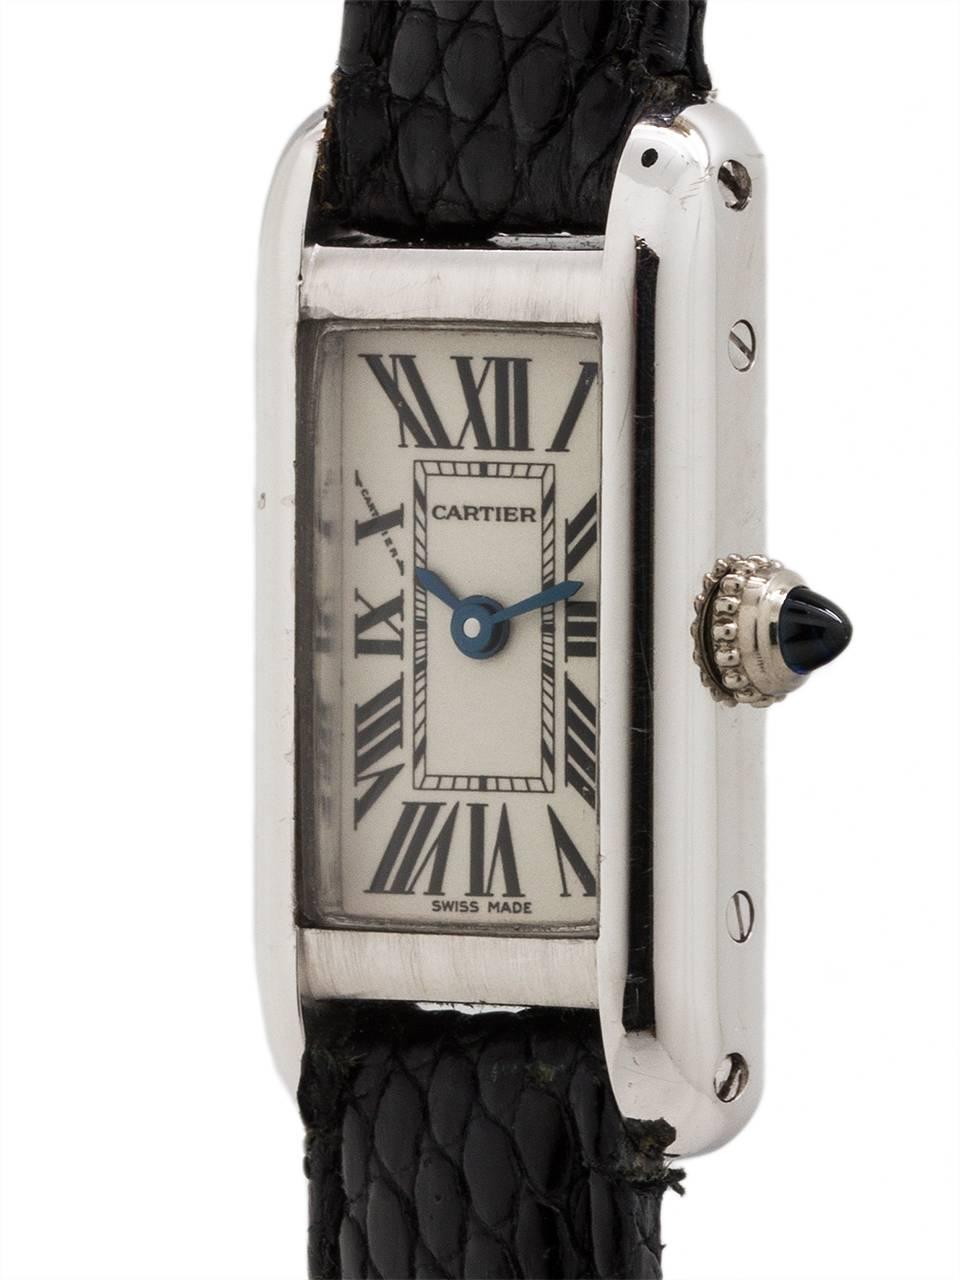 Lady Cartier 18K white gold “Tank Elongee” circa 1980’s with original Cartier 18K WG tang buckle. Featuring a petite 15 X 27mm case secured by 4 side case screws, original gloss white dial with classic Cartier Roman figures, and blued steel hands.